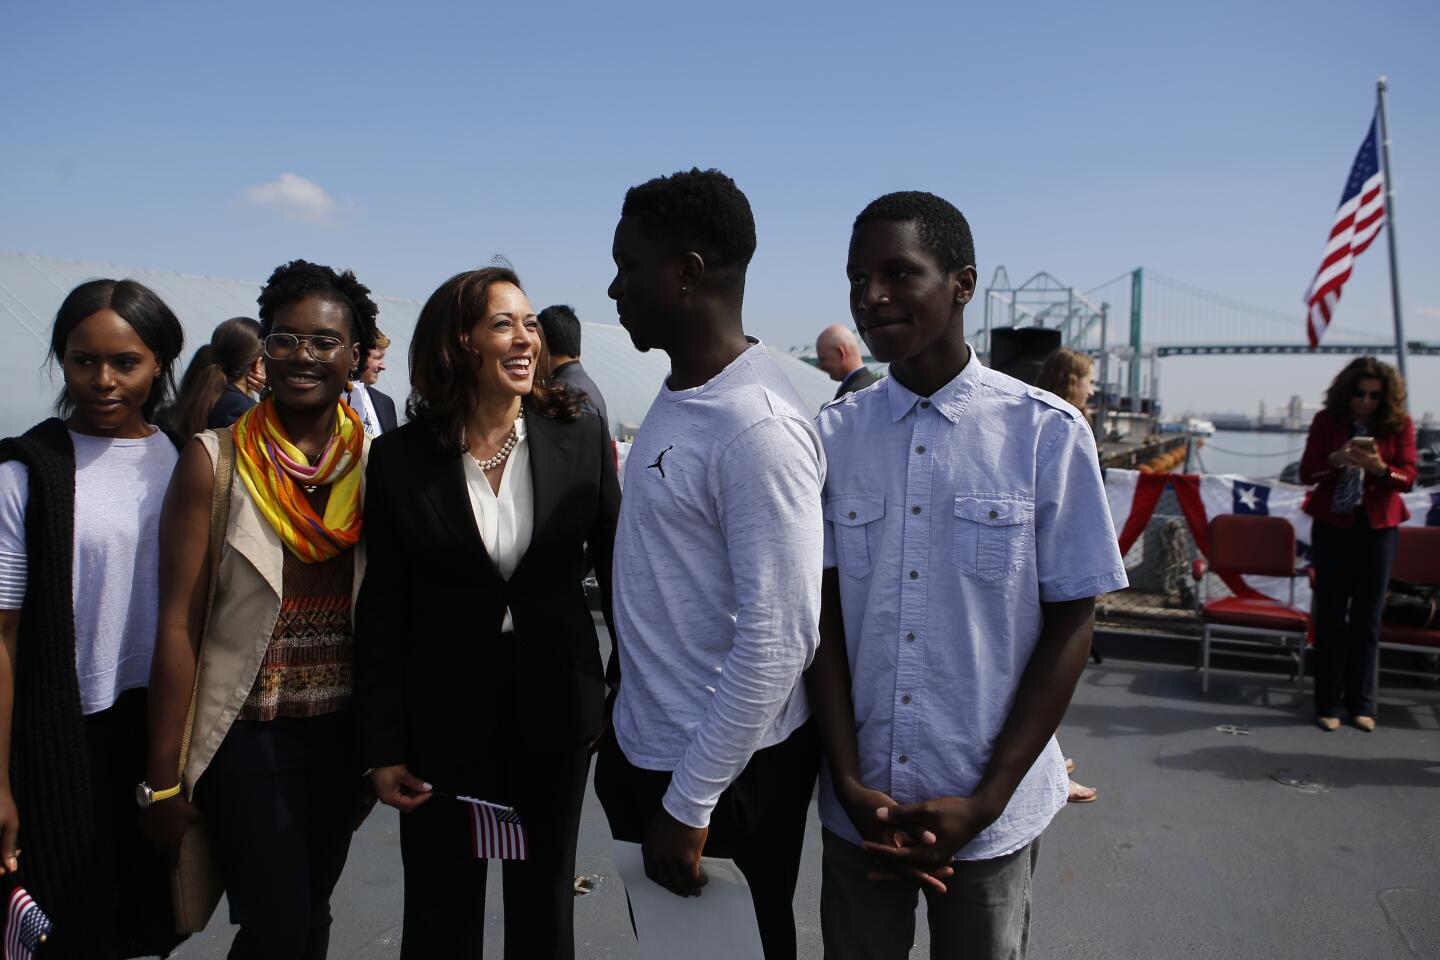 Kamala Harris greets people who were sworn in as citizens in a ceremony on the battleship Iowa in Los Angeles in 2017.